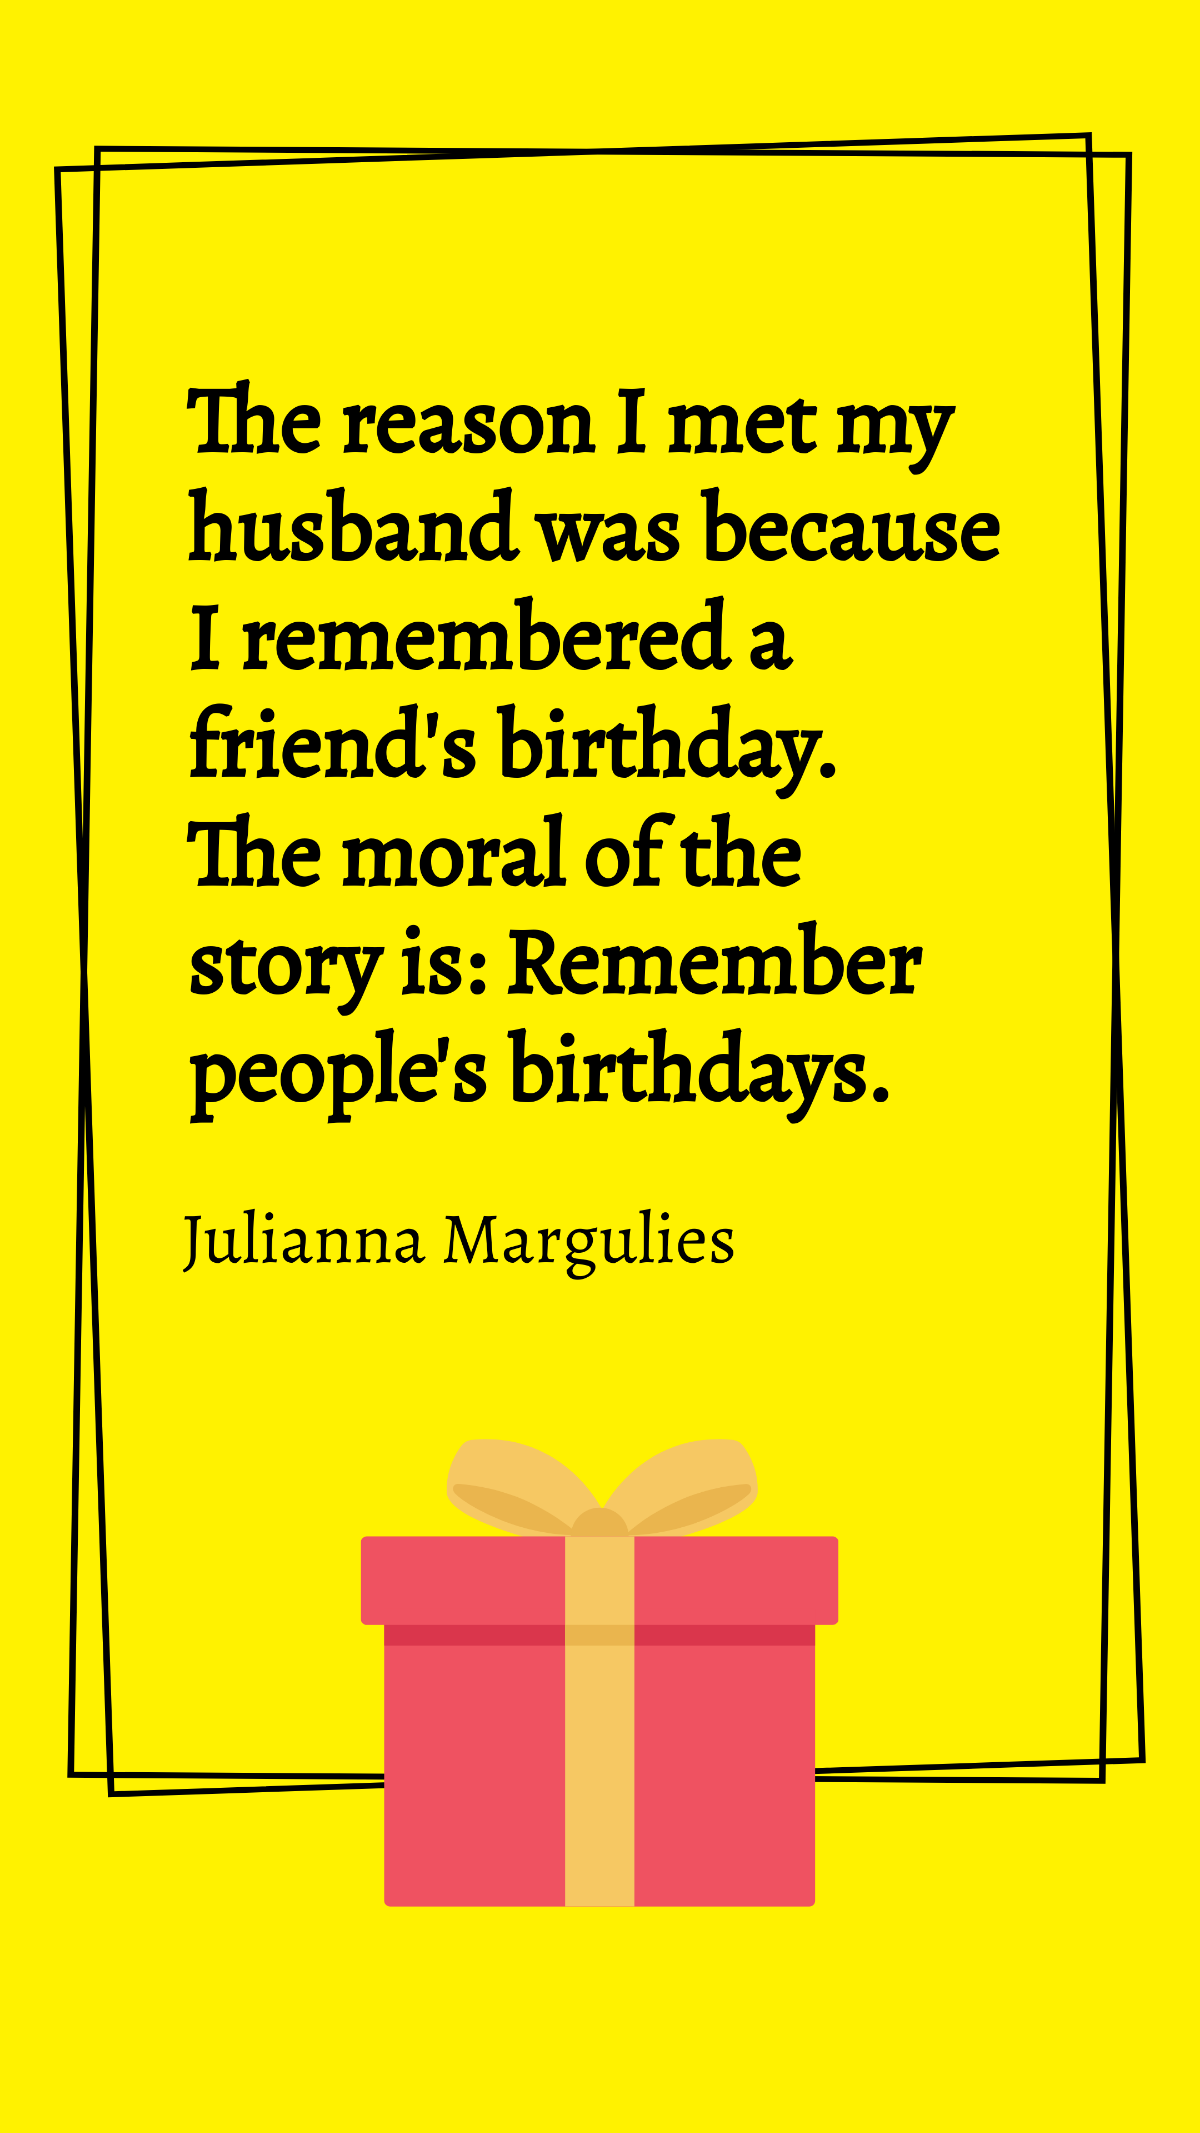 Julianna Margulies - The reason I met my husband was because I remembered a friend's birthday. The moral of the story is: Remember people's birthdays. Template